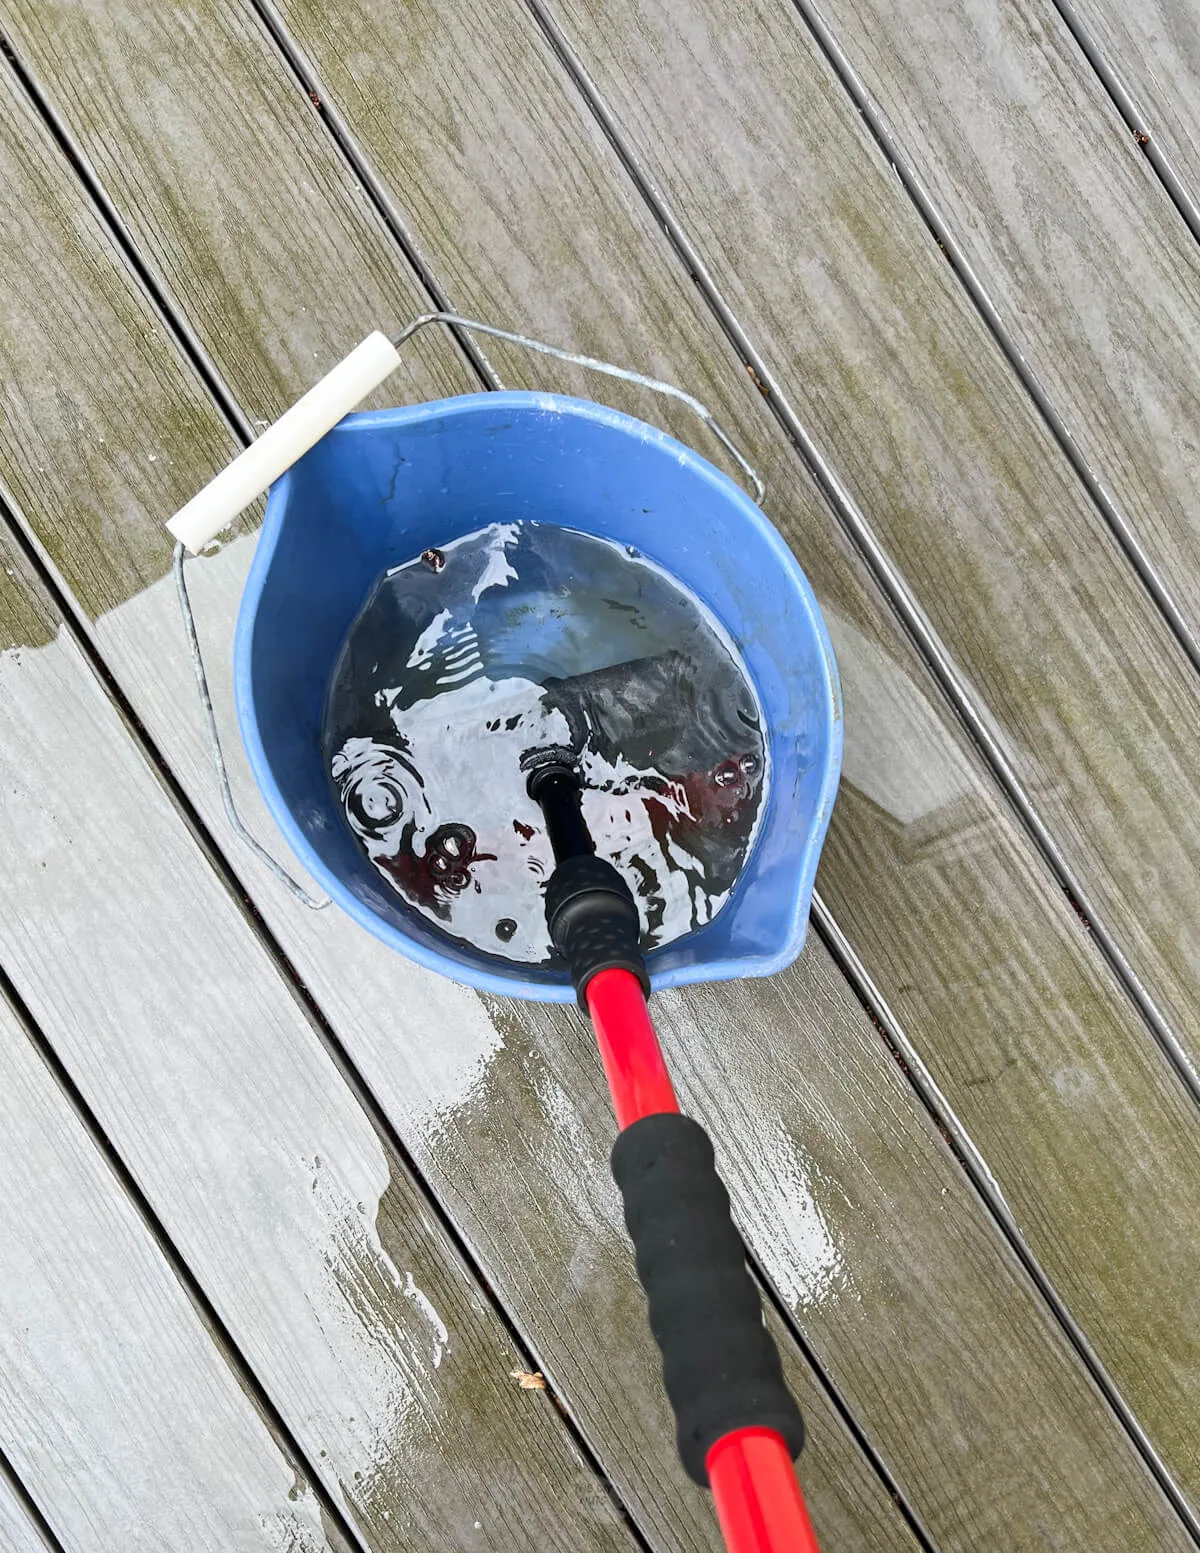 deck brush being put in DIY cleaning solution in blue bucket.